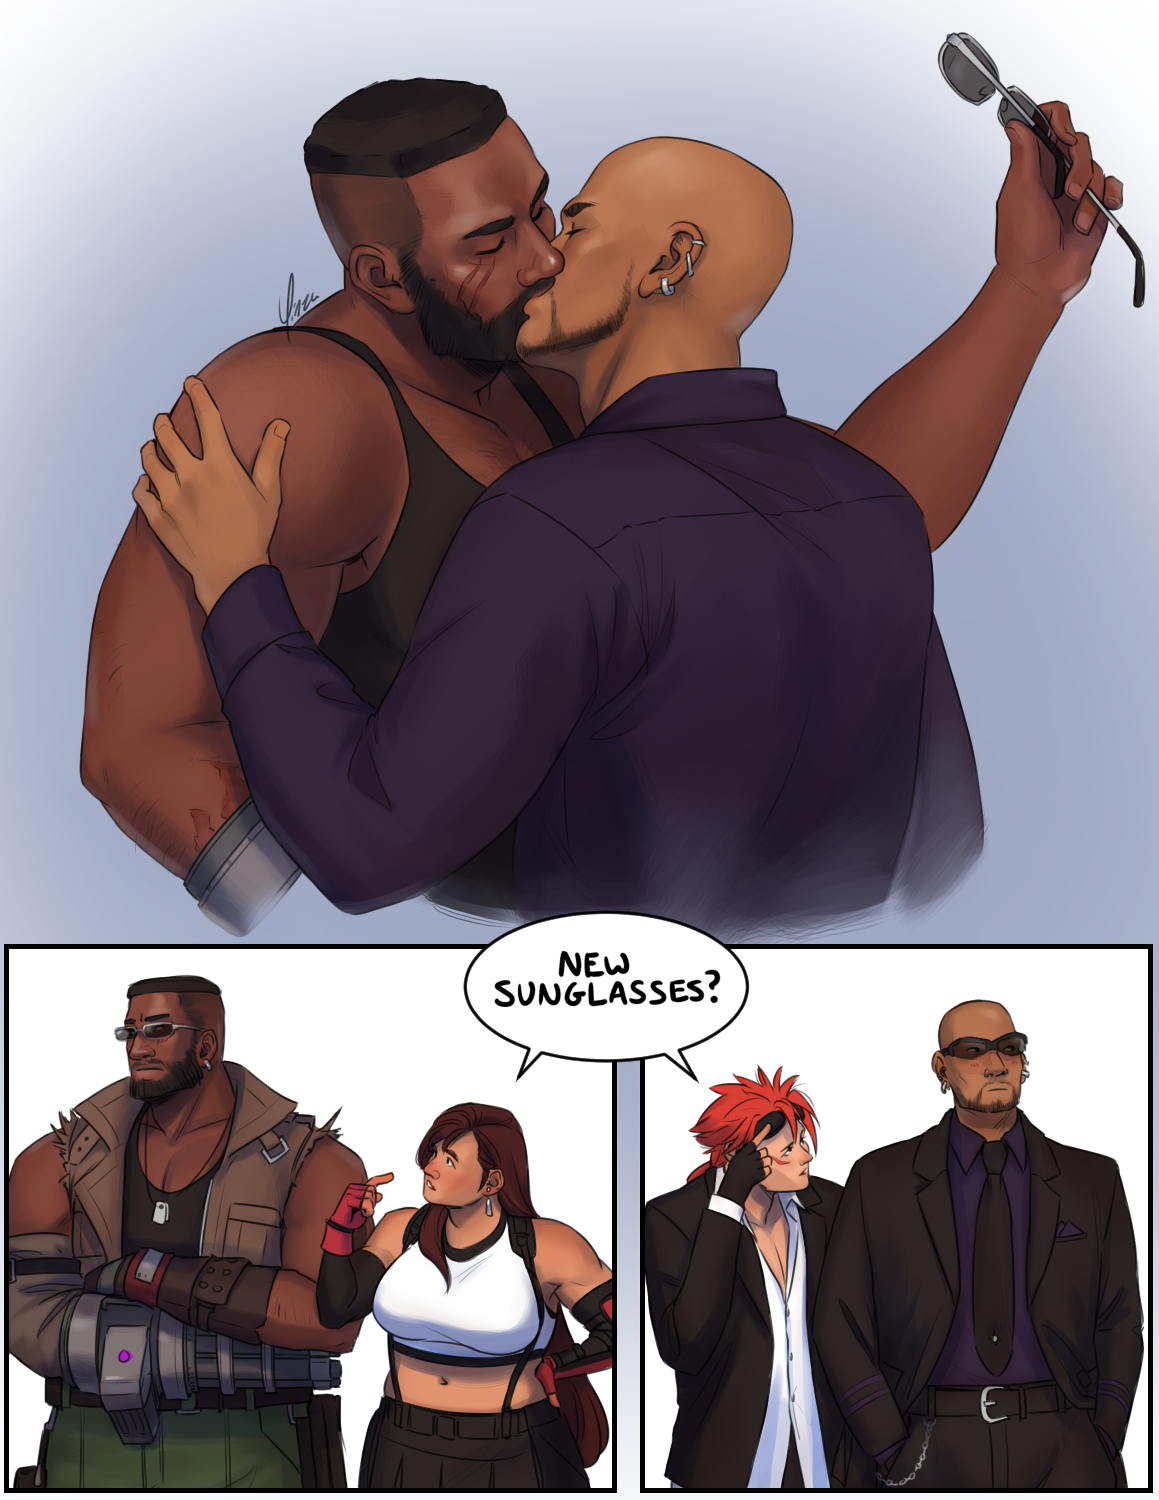 A digital comic in 3 panels. The first depicts Barret and Rude from the waist up, sharing a passionate kiss. Barret is wearing his black tank top while Rude is down to his purple dress shirt. Rude has his left hand on Barret’s shoulder while Barret holds Rude’s sunglasses in his left hand, having just removed them. The other two panels separately depict Barret and Tifa, and Reno and Rude. Tifa and Reno are each pointing to their faces and share a dialogue bubble reading 